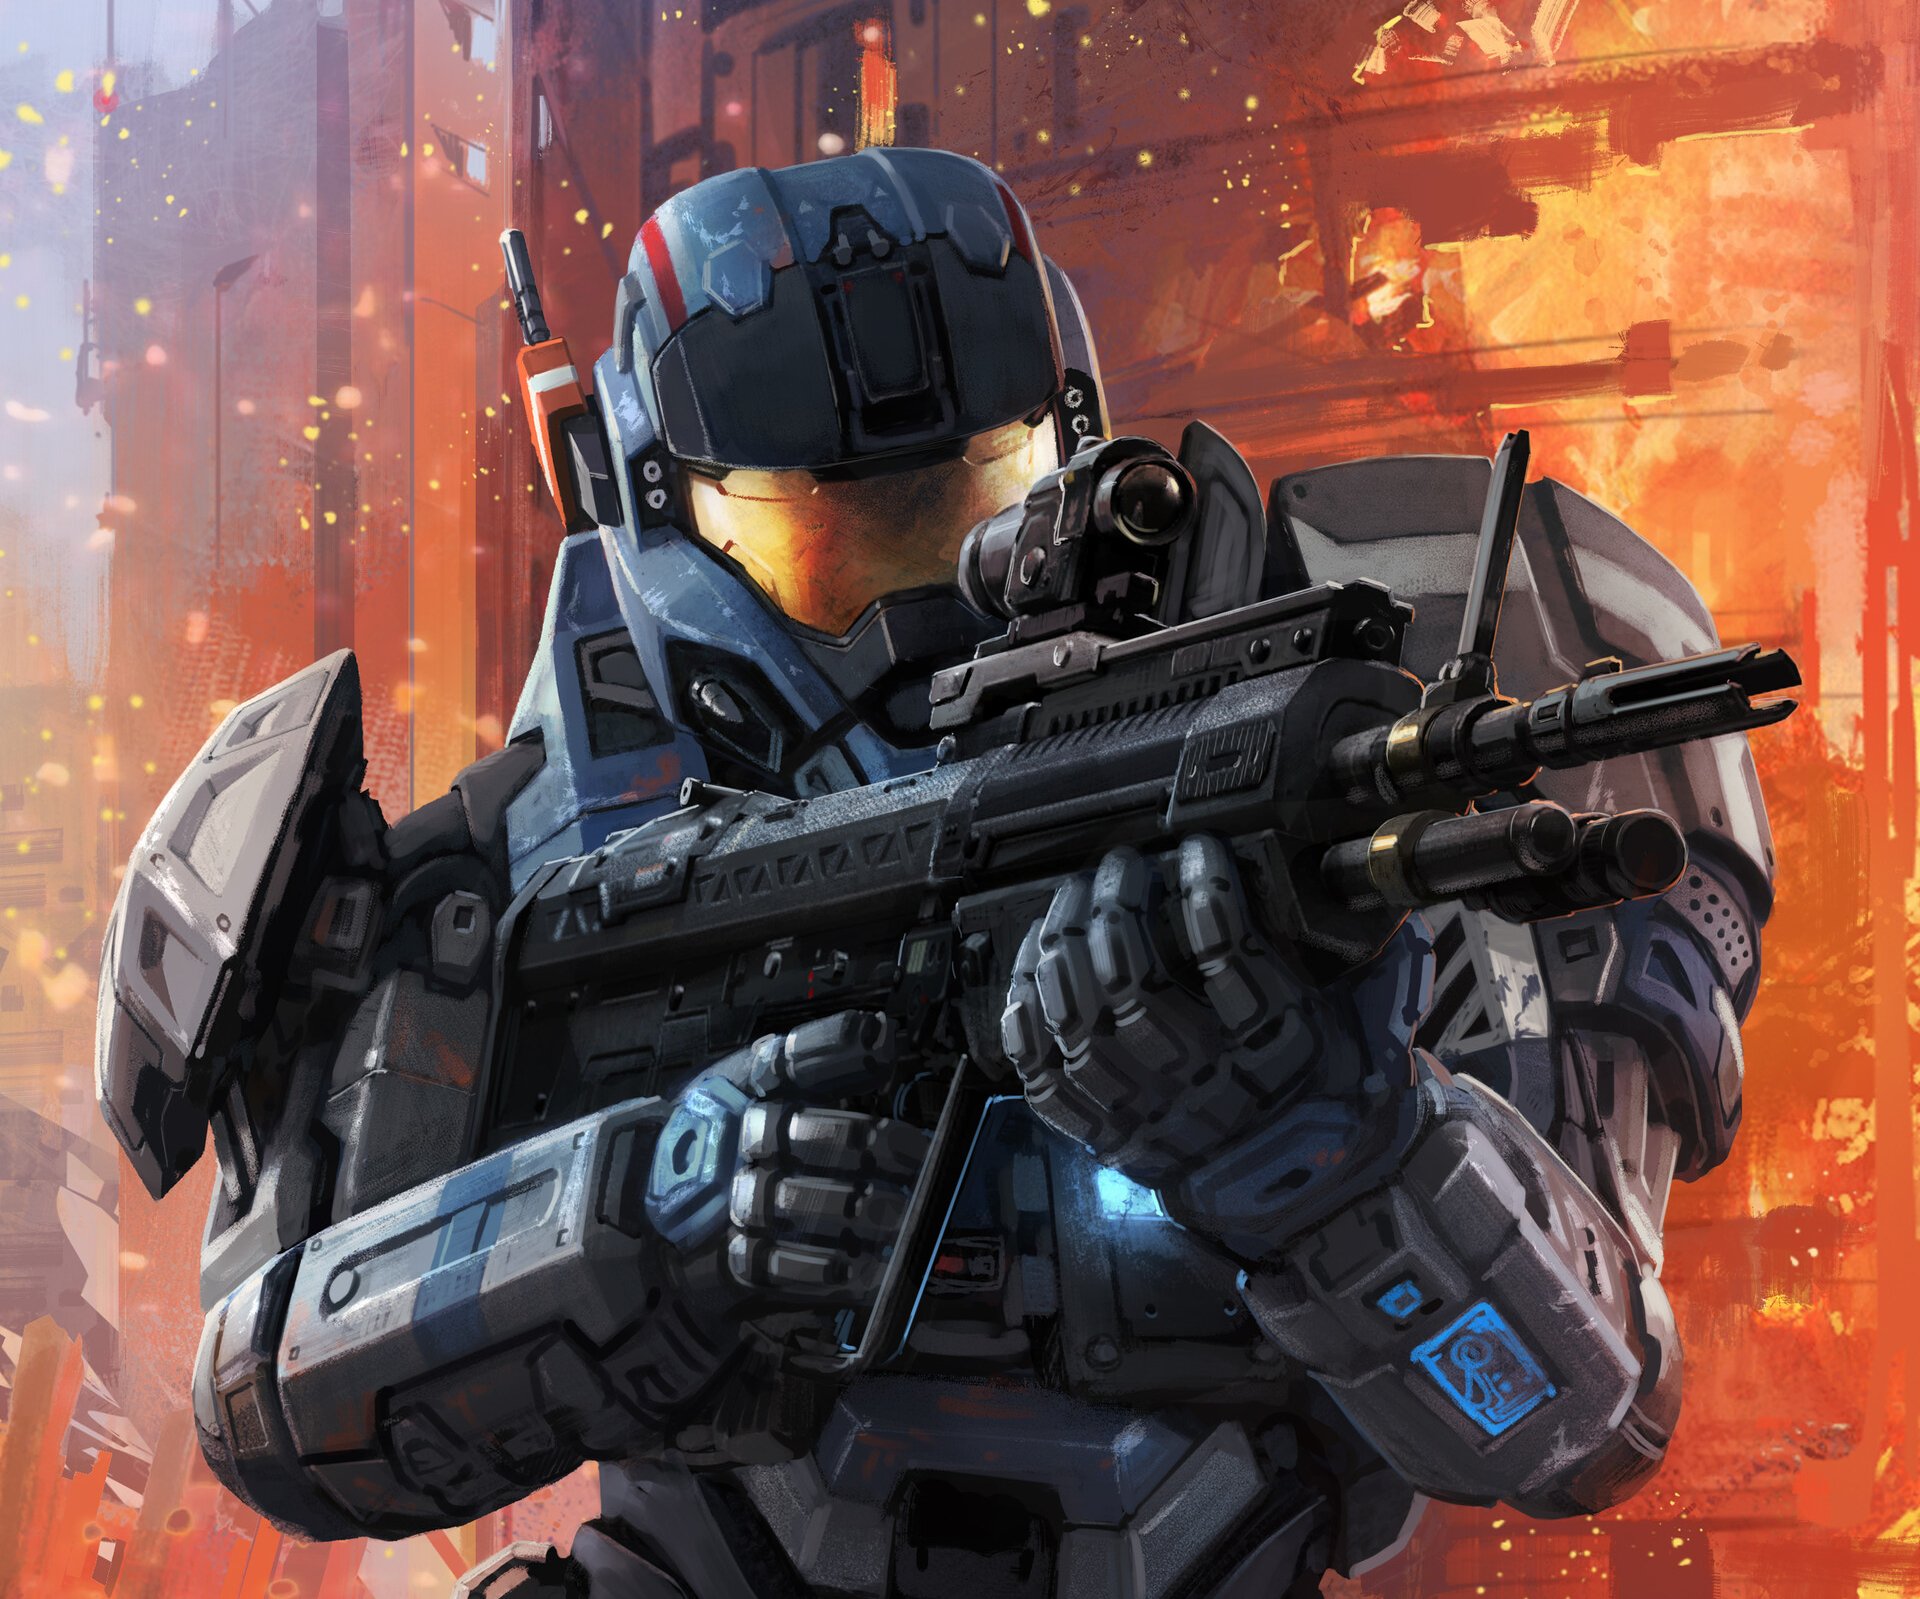 Download Weapon Warrior Halo Video Game Halo: Reach HD Wallpaper by ...